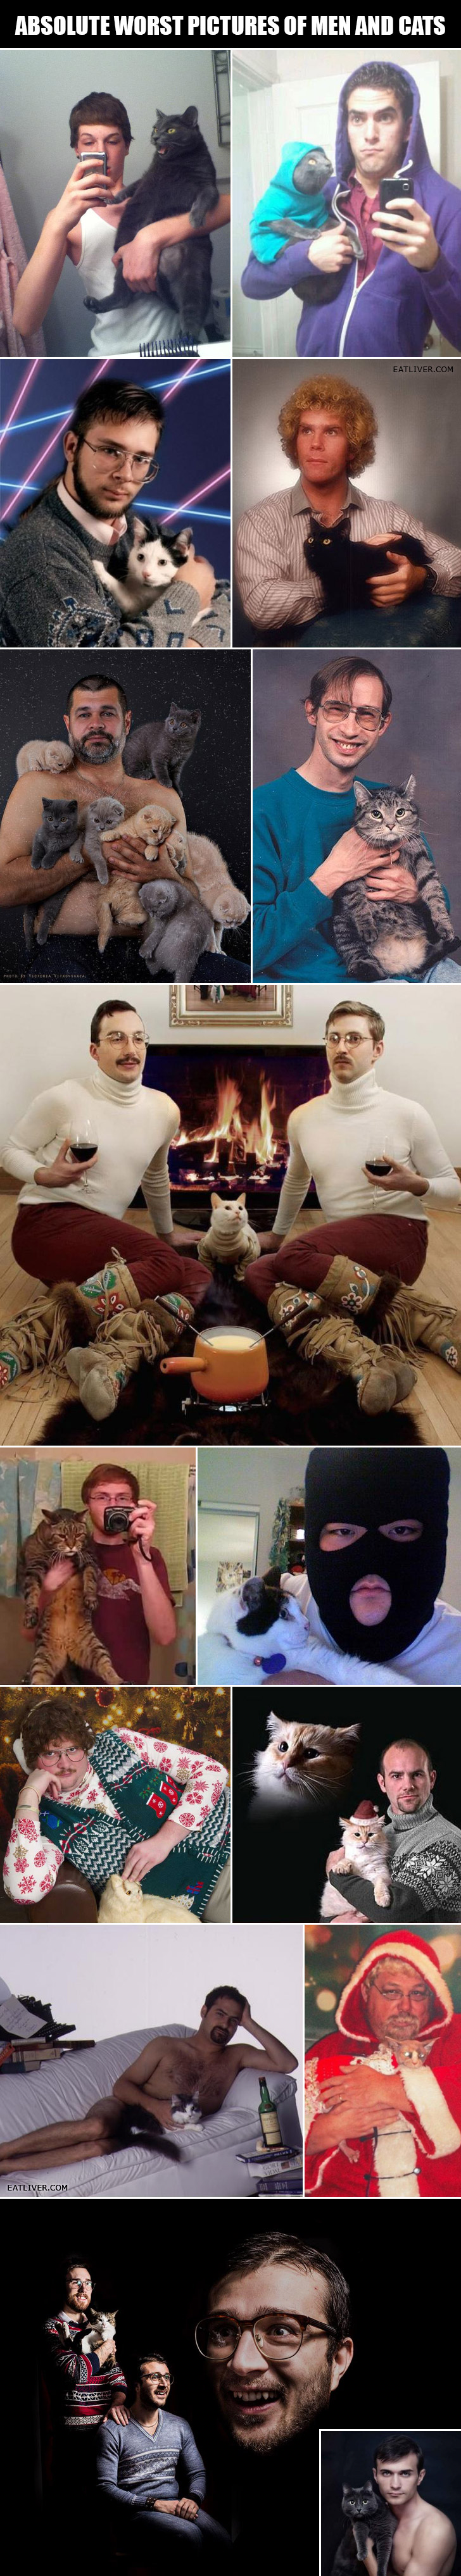 absolute worst pictures of men and cats